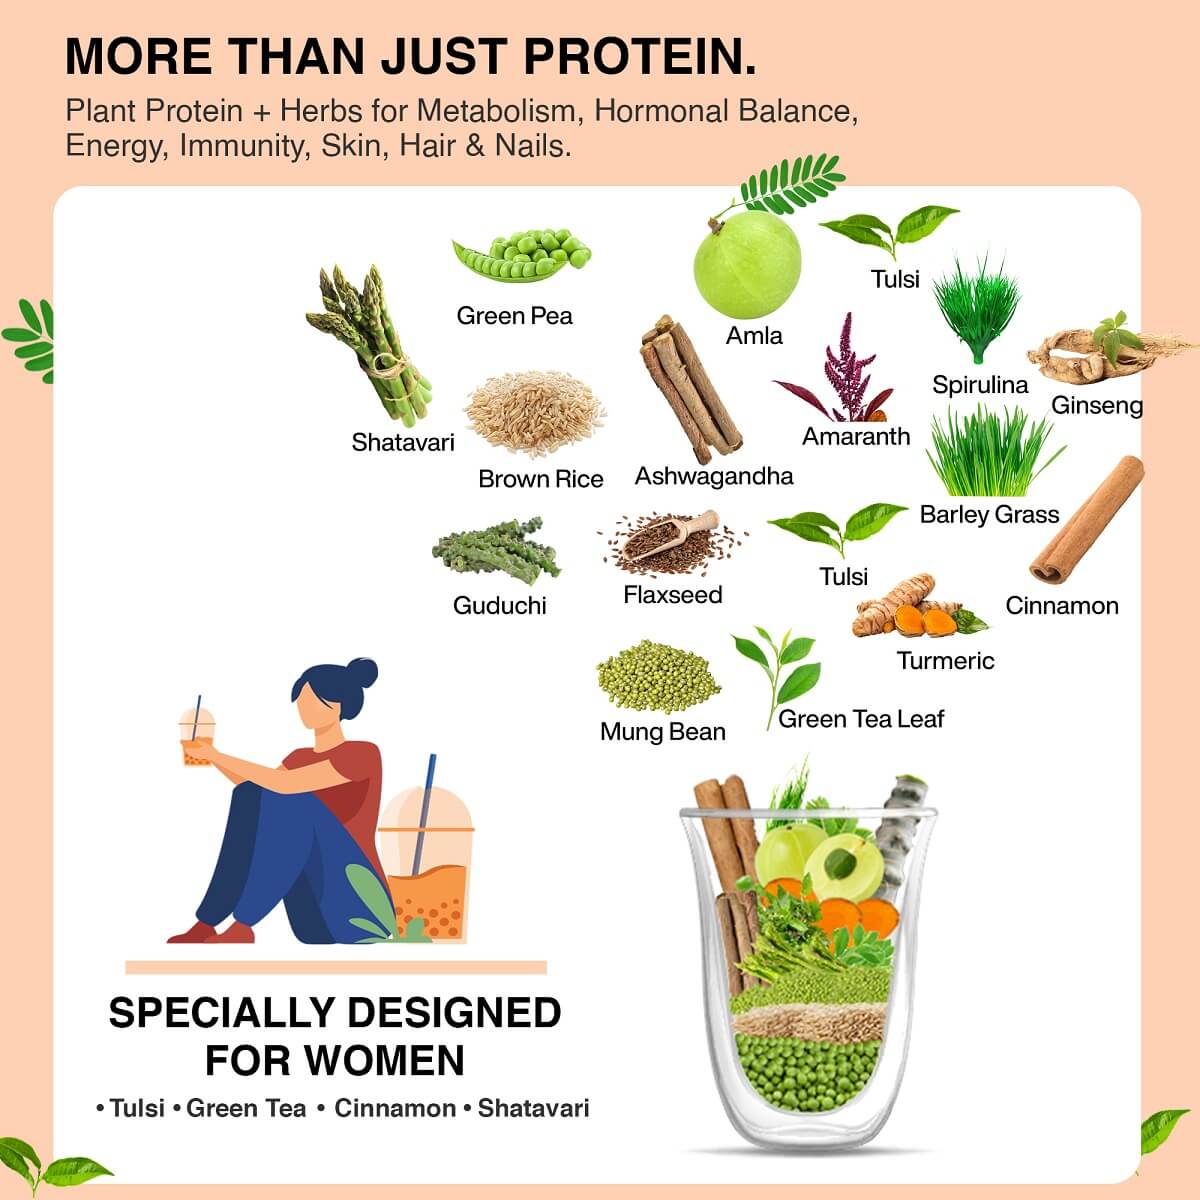 Women Clean Plant Protein With Ayurvedic Herbs (Natural Herbs, Vitamins & Minerals For Hormonal Balance, Metabolism, Skin, Hair, Stress & Energy)